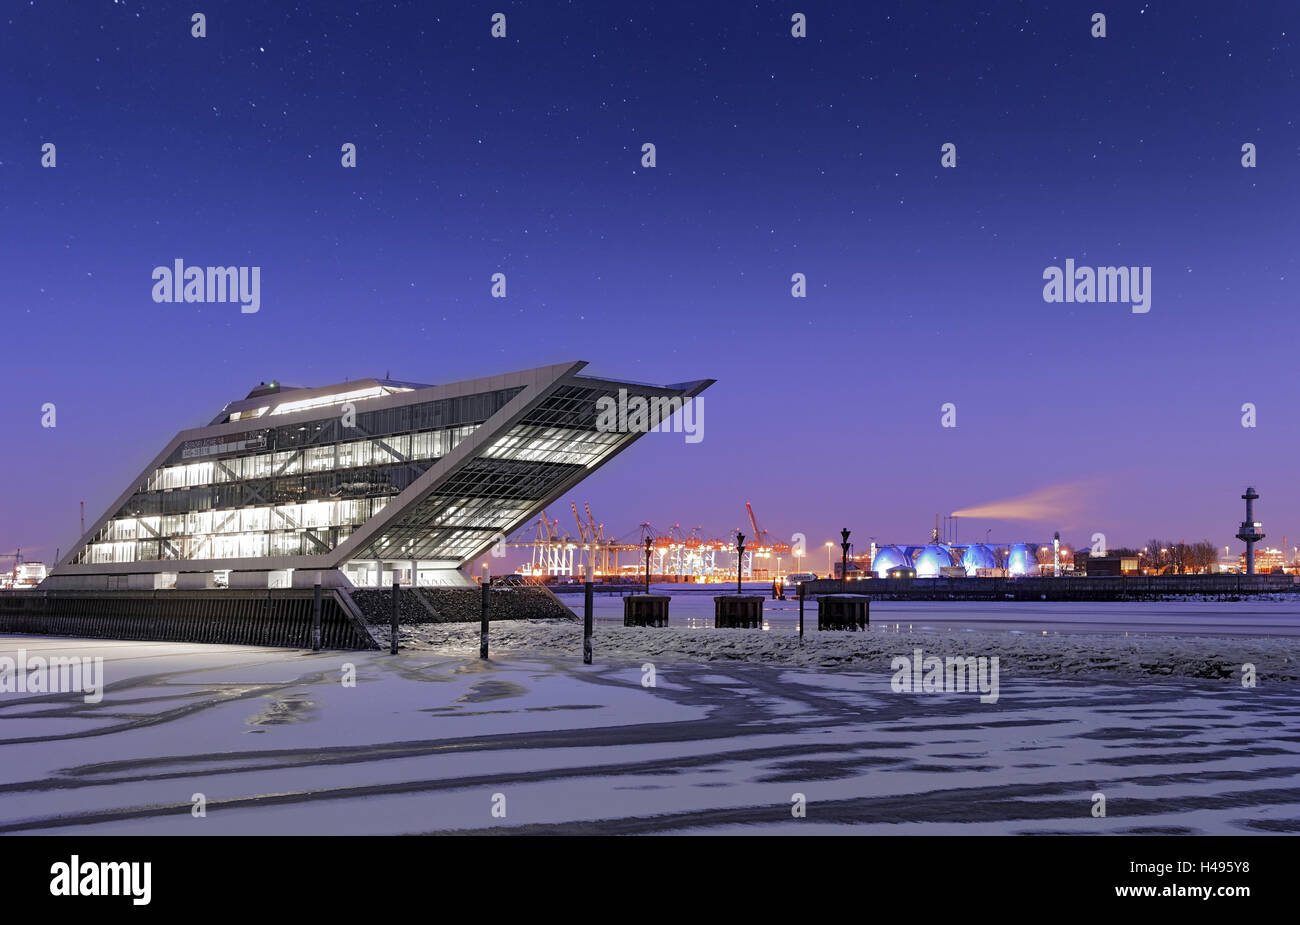 Dockland, office building, Floating ice on the Elbe River, harbour cranes, evening mood, Neumühlen, Hanseatic City Hamburg, Germany, Stock Photo